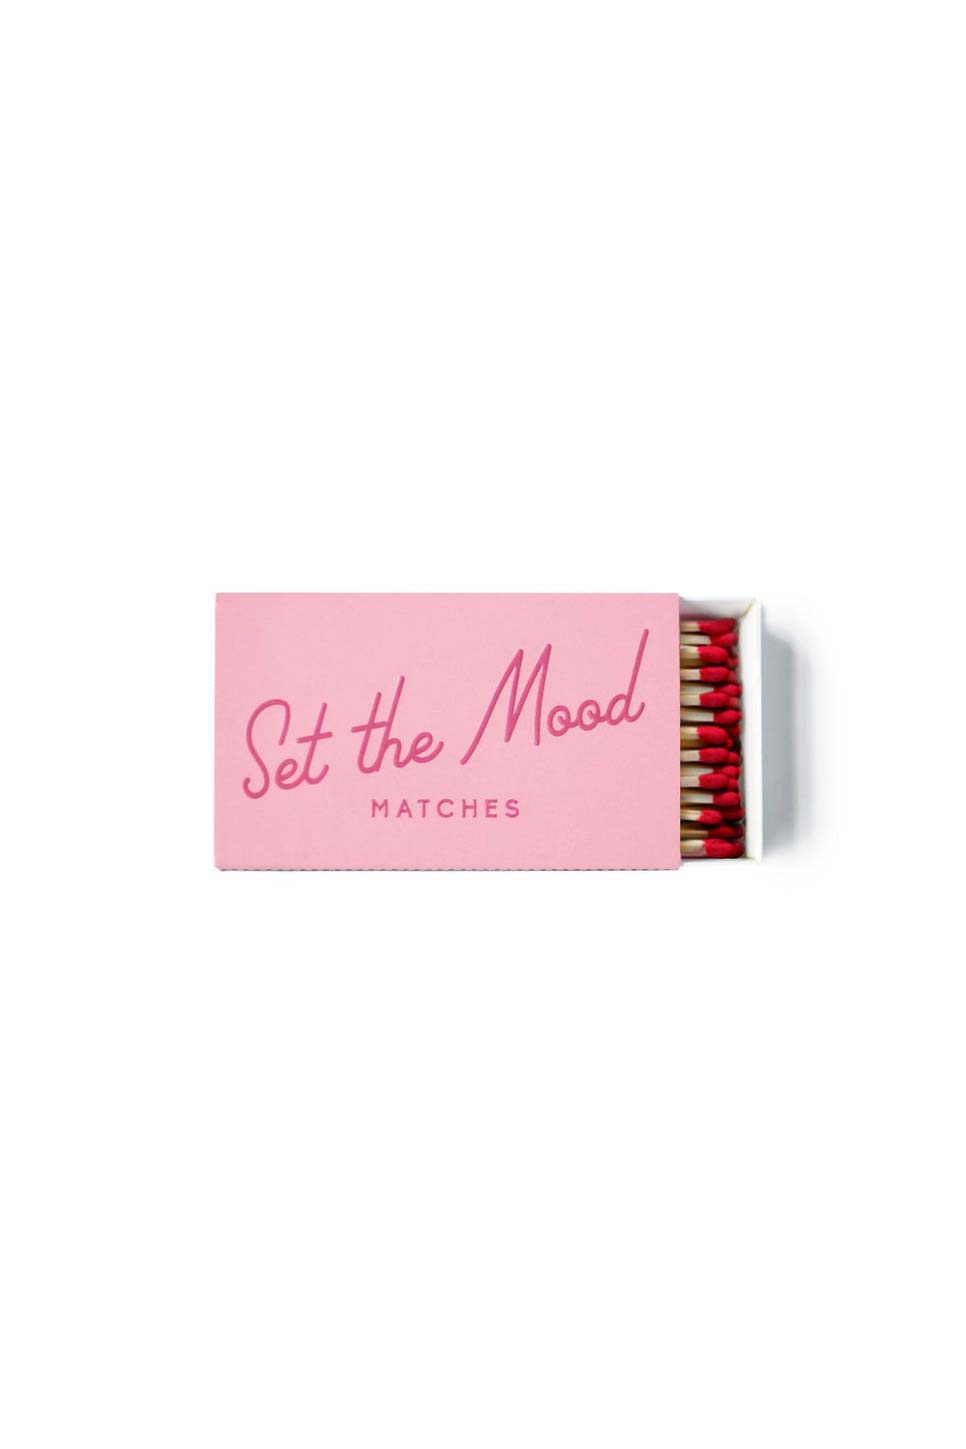 Paddywax - Set the Mood Matches